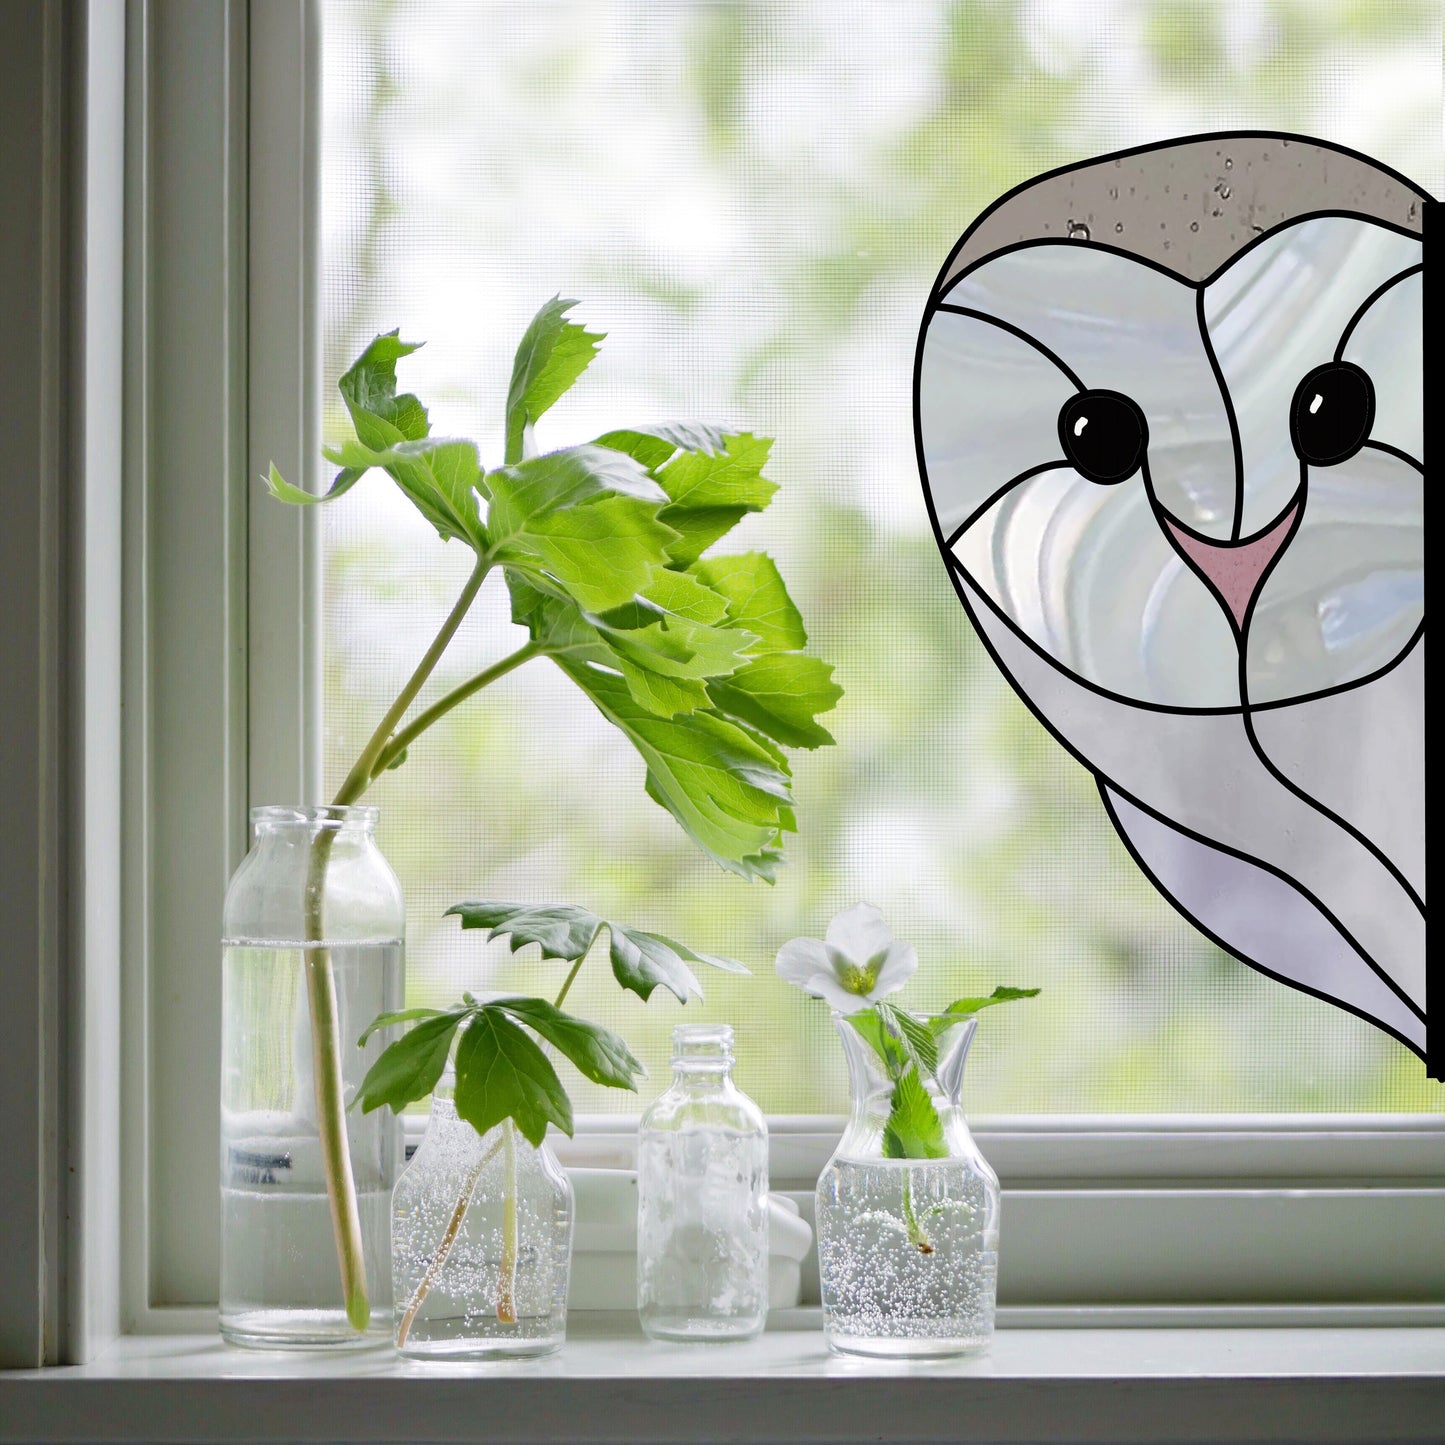 Snowy Owl Stained Glass Pattern